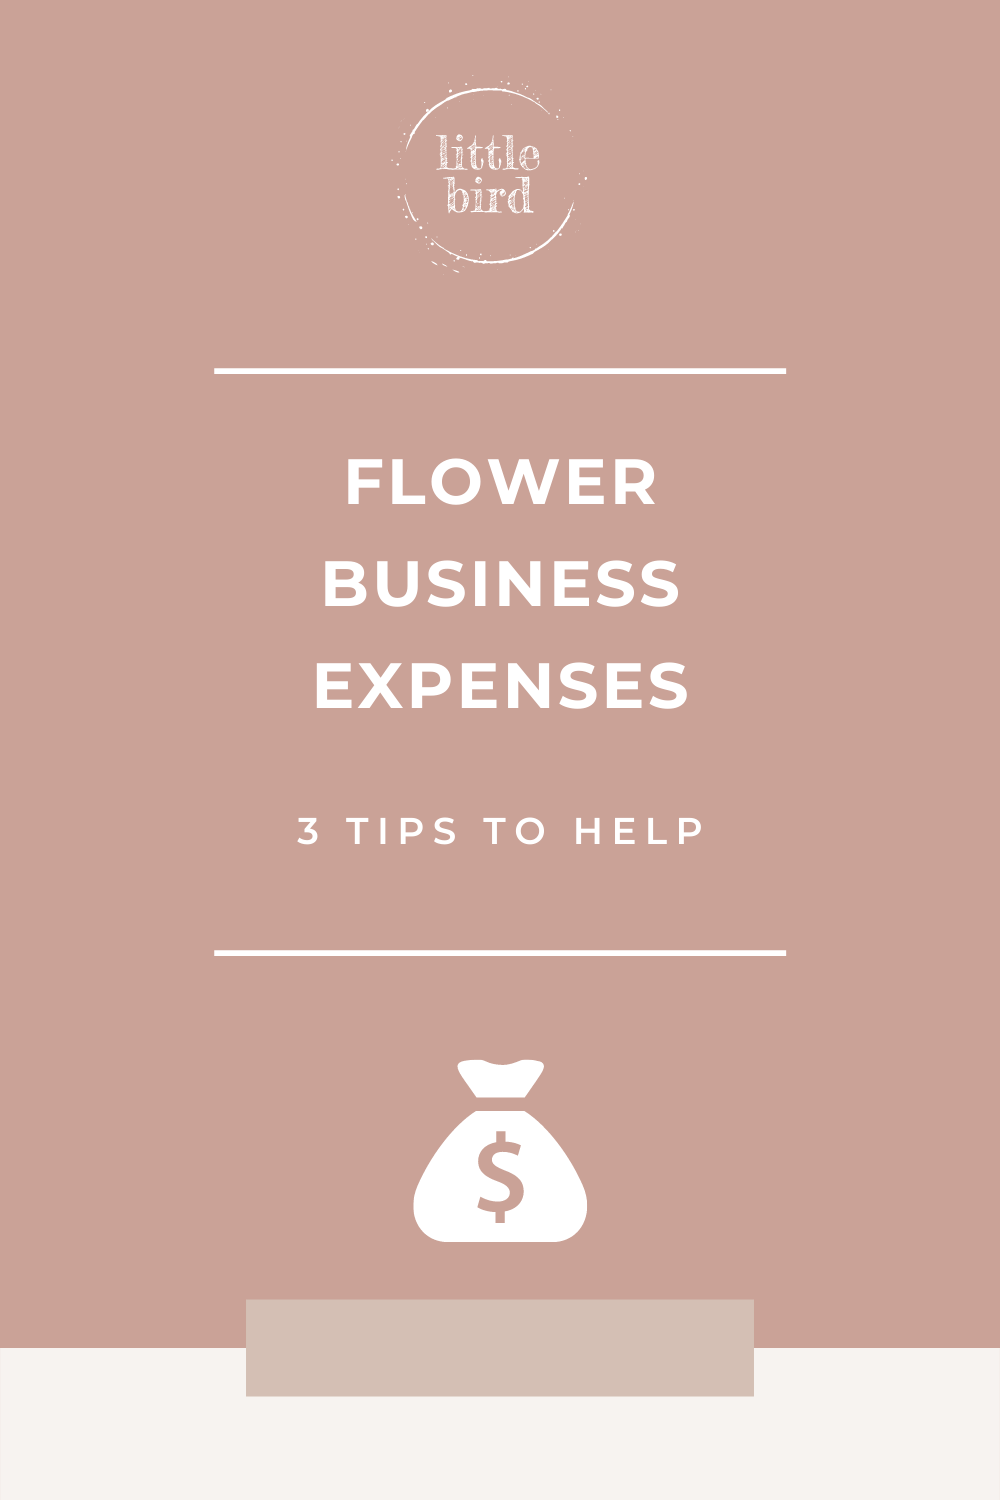 this is a blog post about how to manage flower business expenses